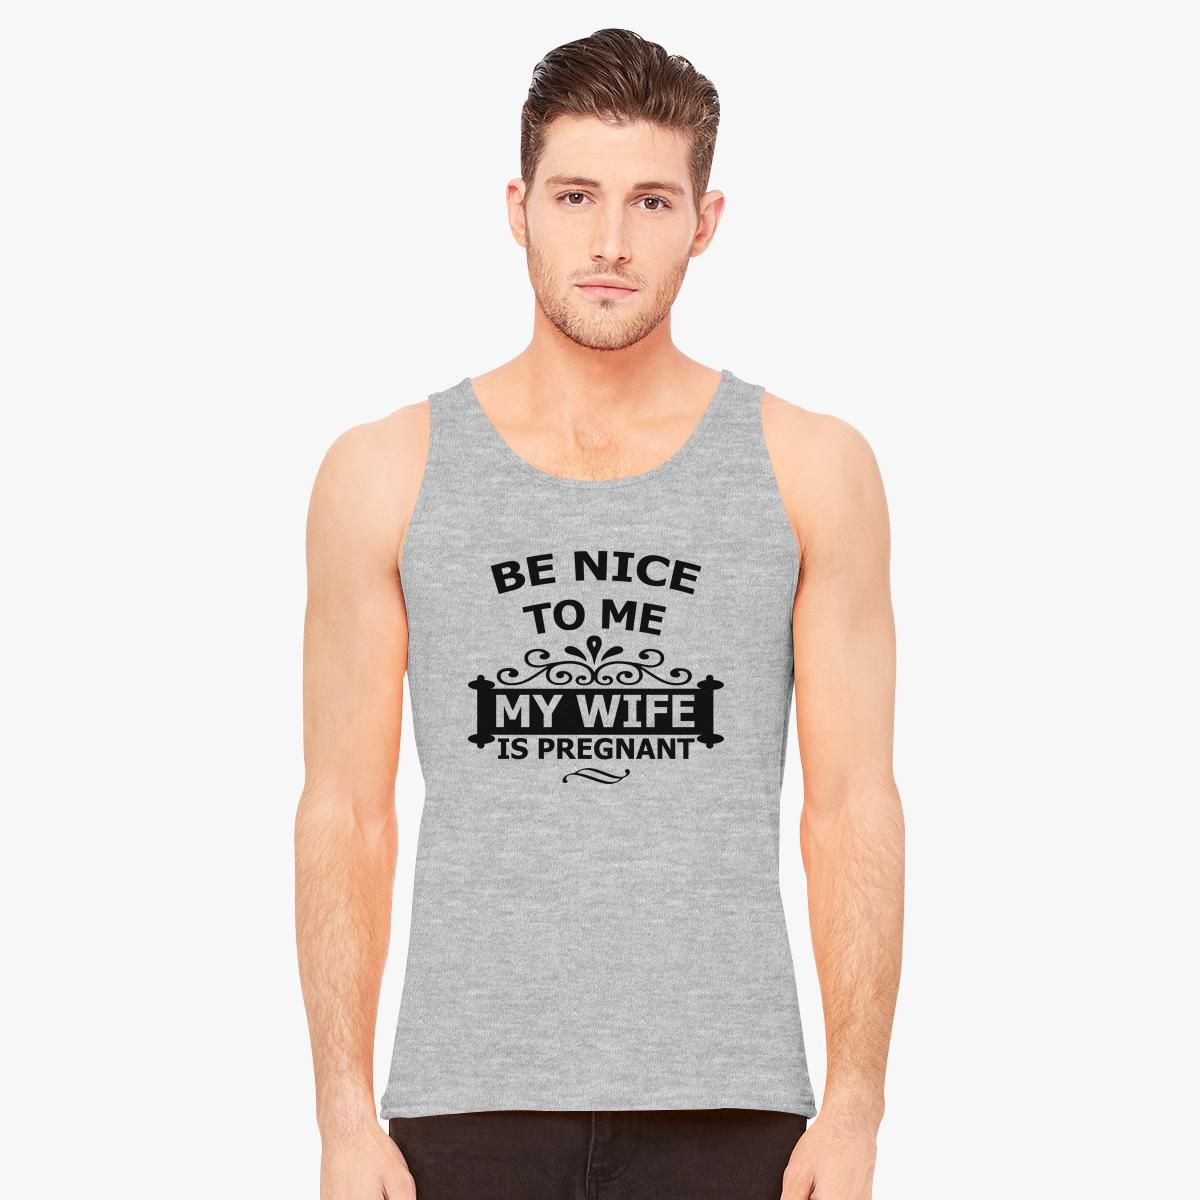 Be Nice To Me My Wife is Pregnant Funny Men's Tank Top - Customon